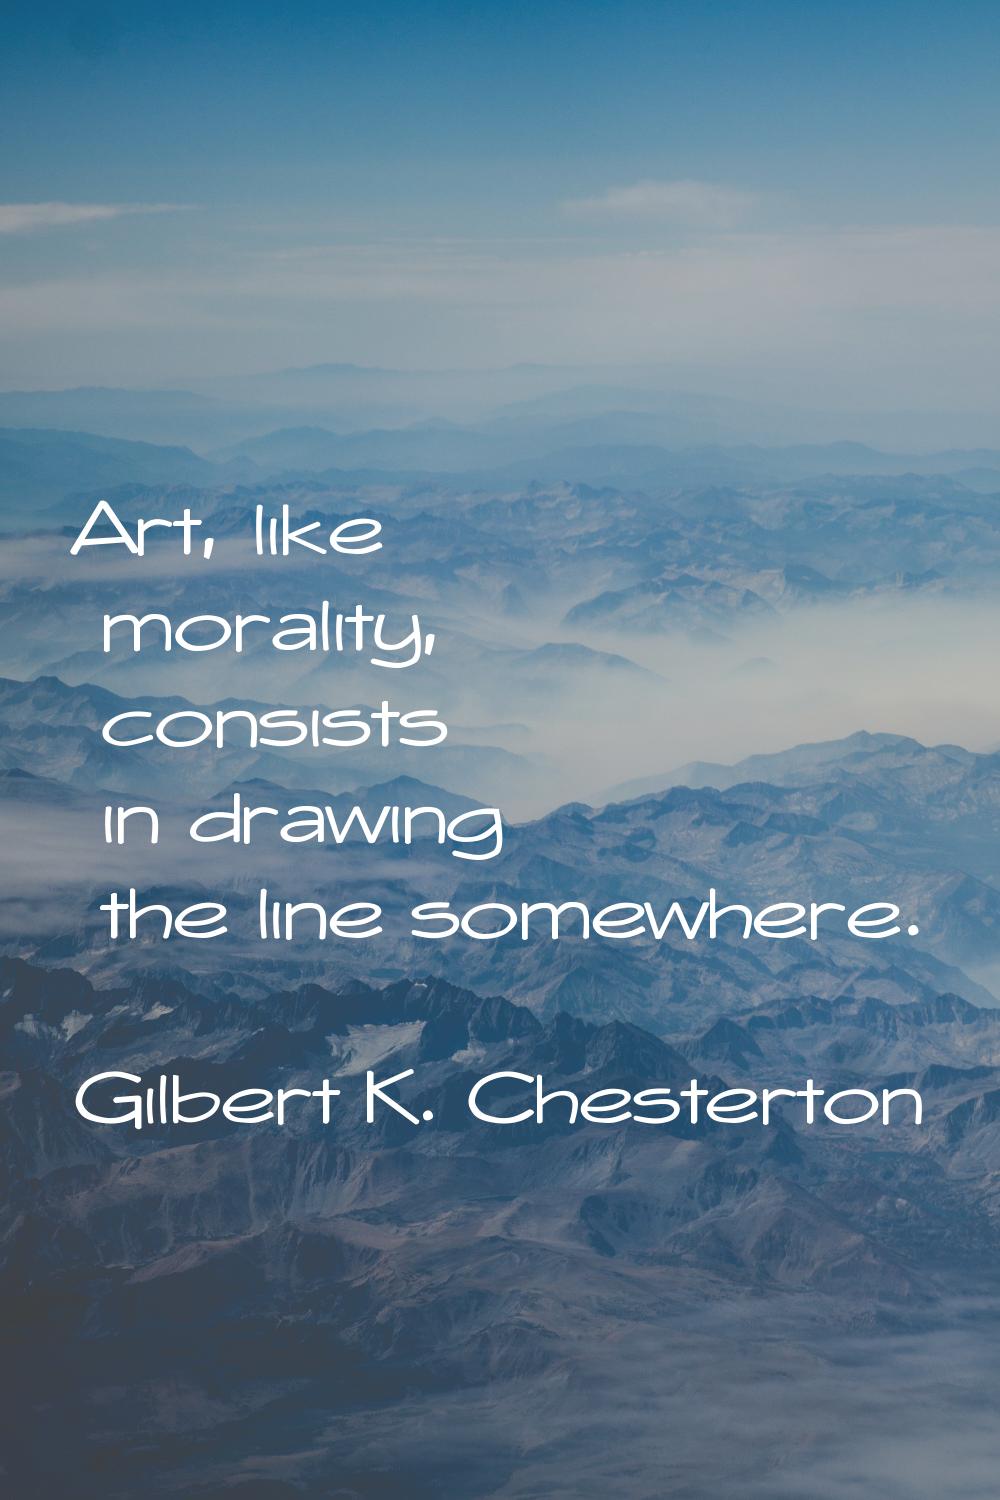 Art, like morality, consists in drawing the line somewhere.